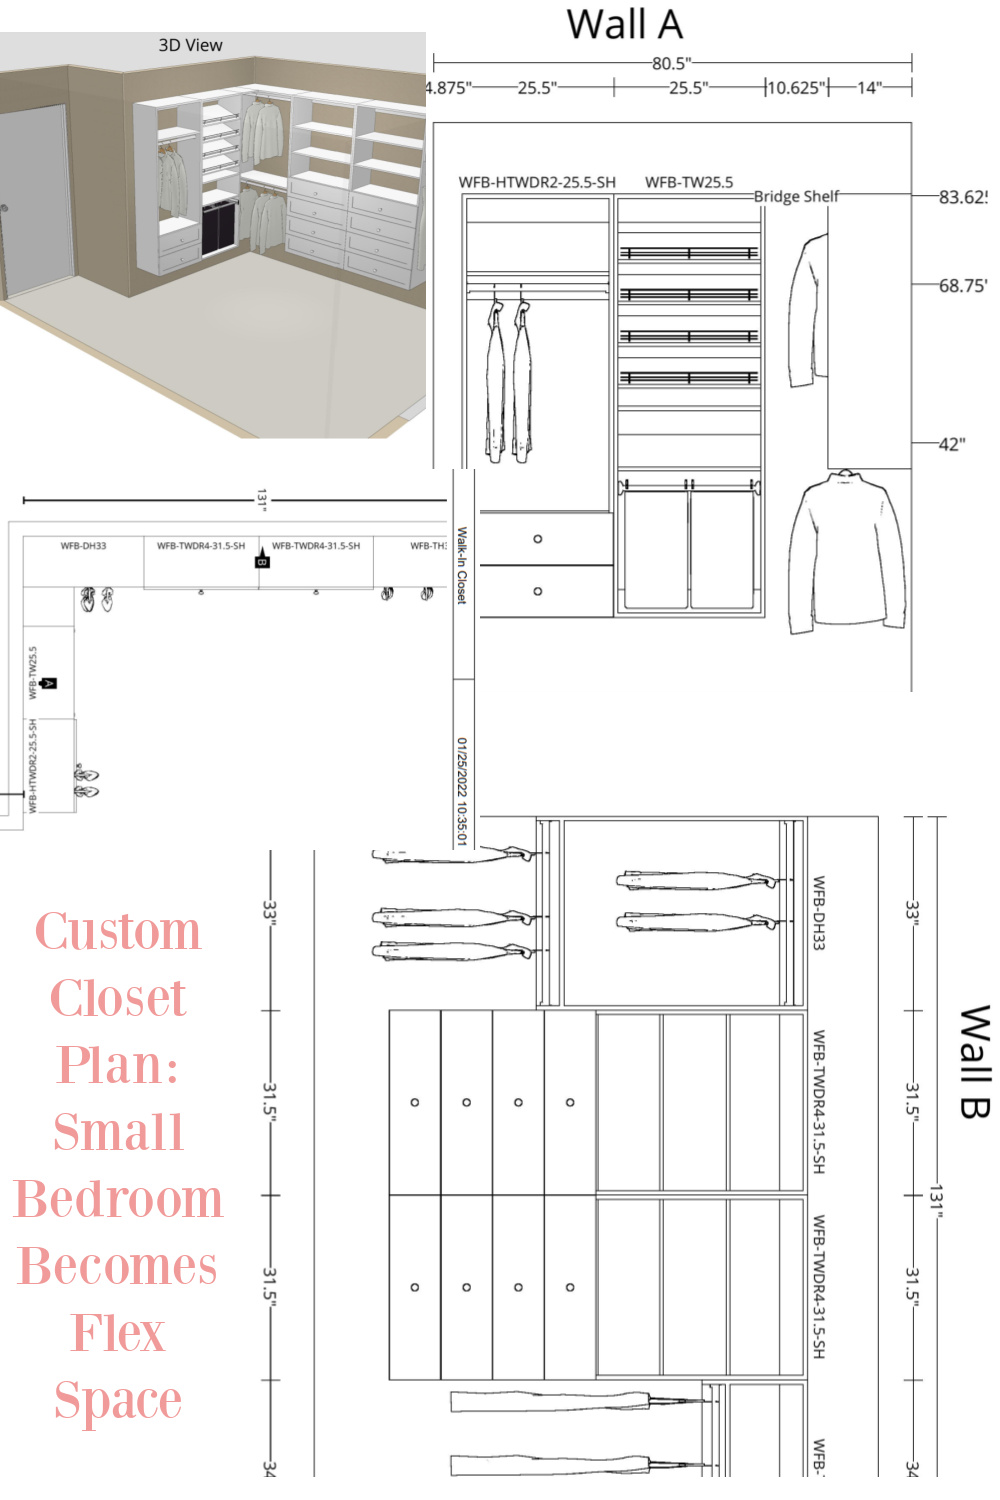 Design plan from Modular Closets for the closet - Hello Lovely Studio.